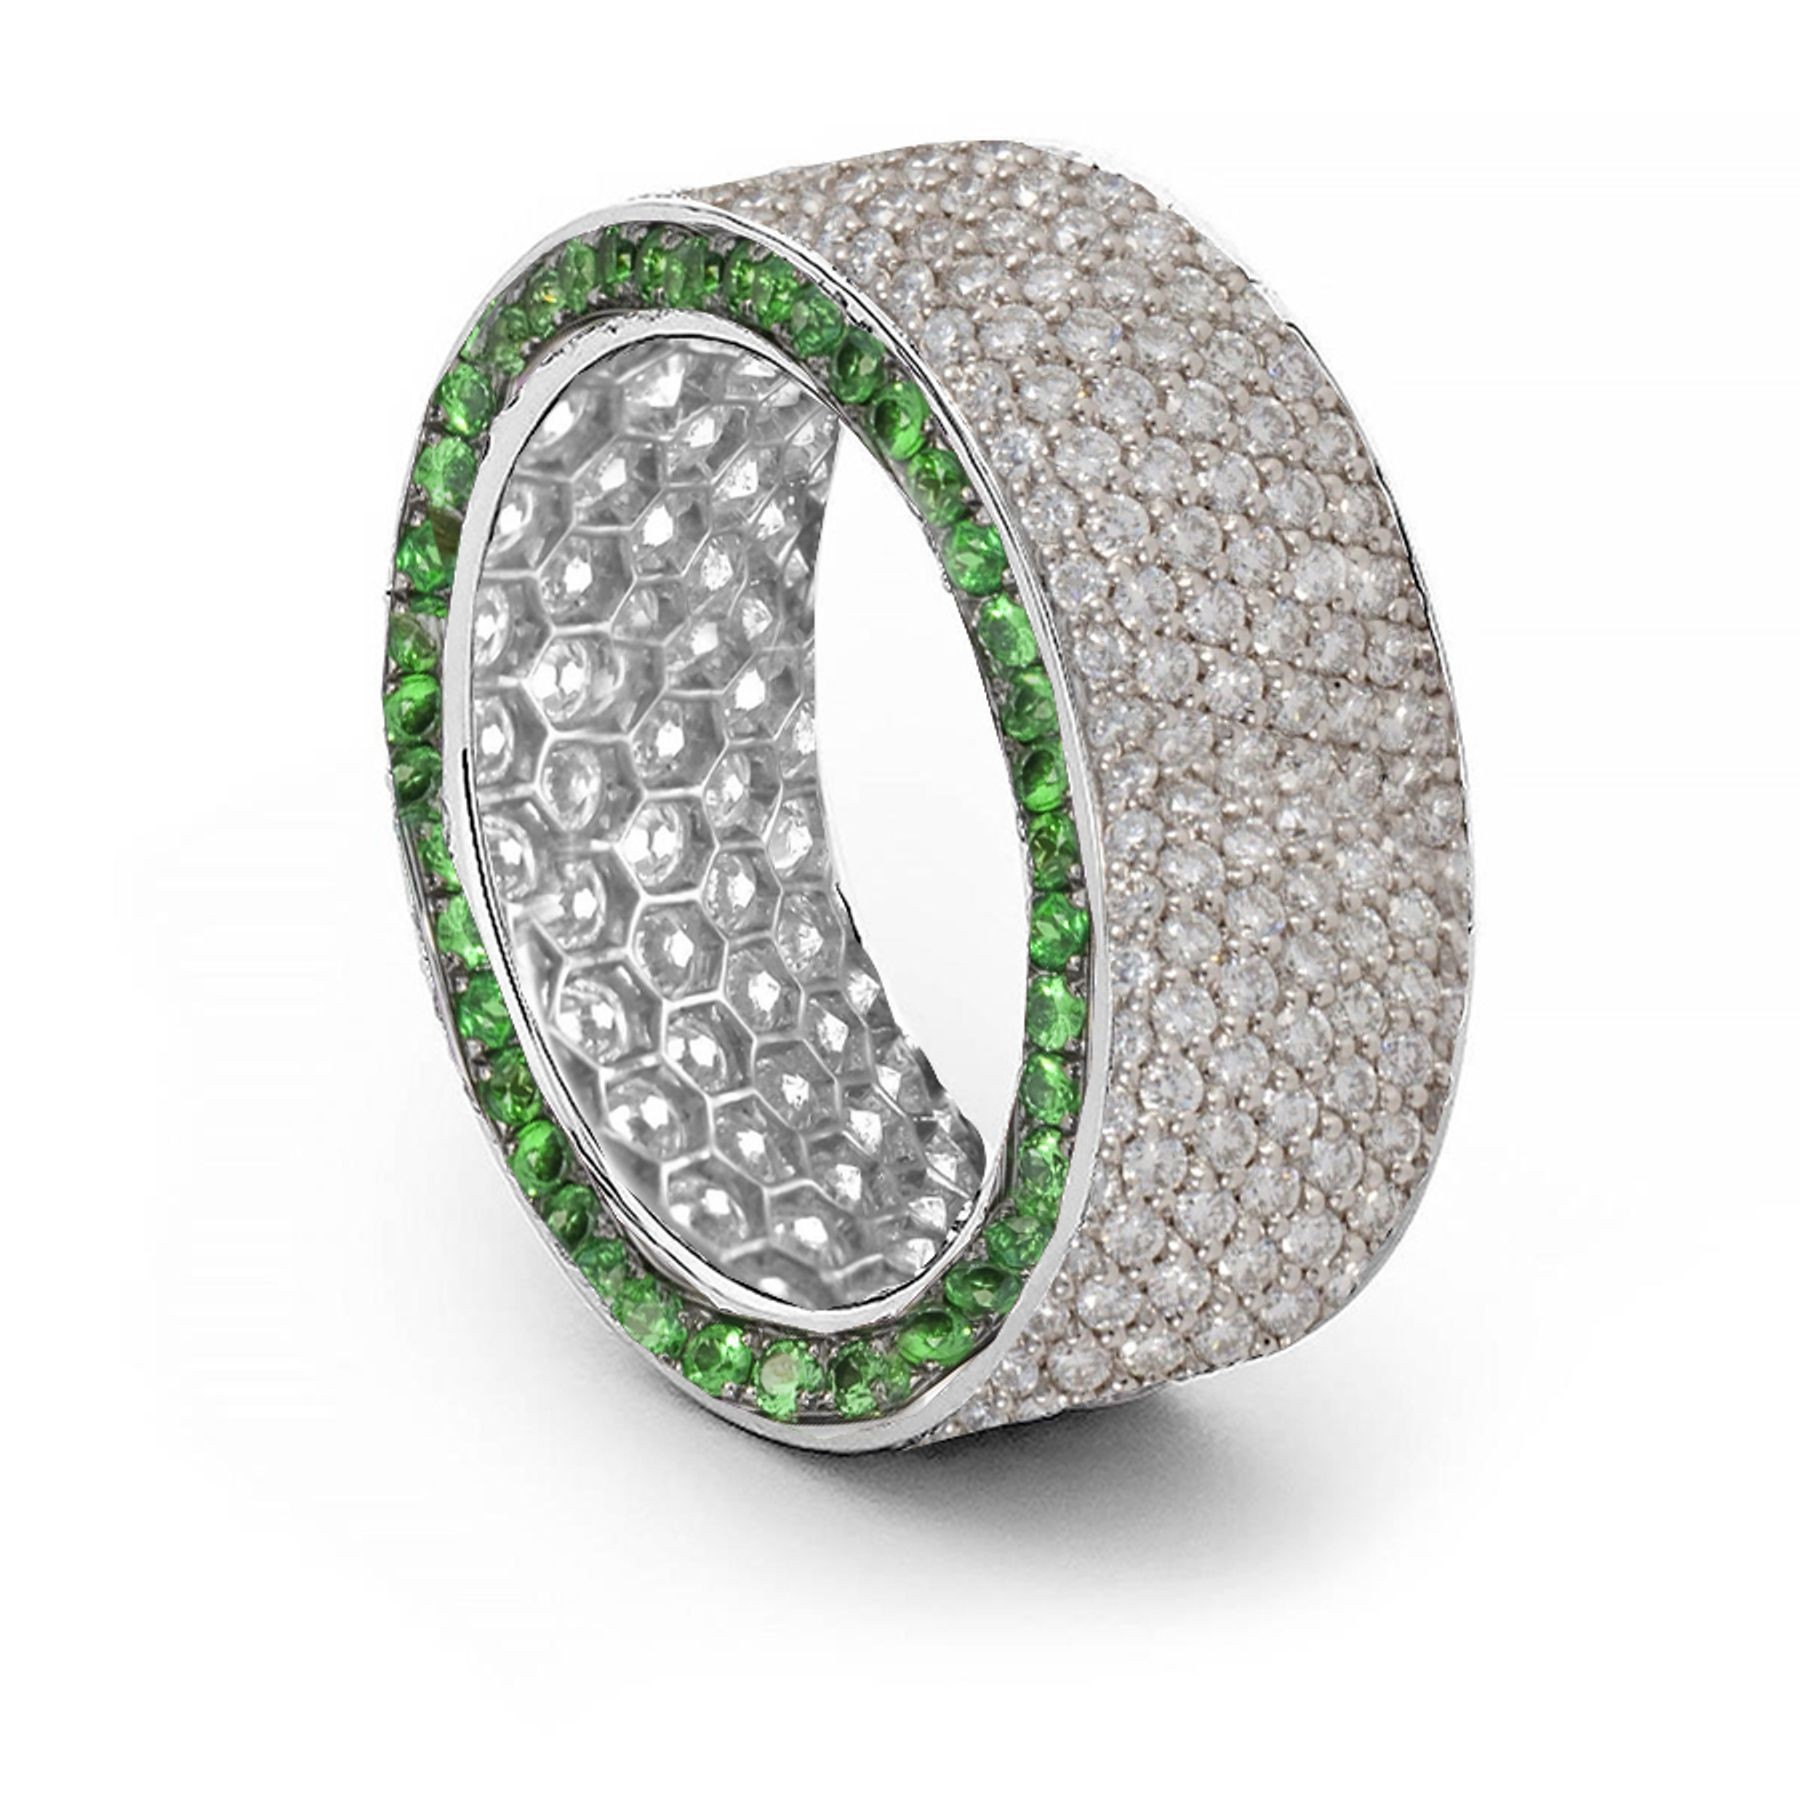 Shop Fine Quality Made To Order Round pave Set Diamond & Emerald Eternity Style Wedding & Anniversary Rings